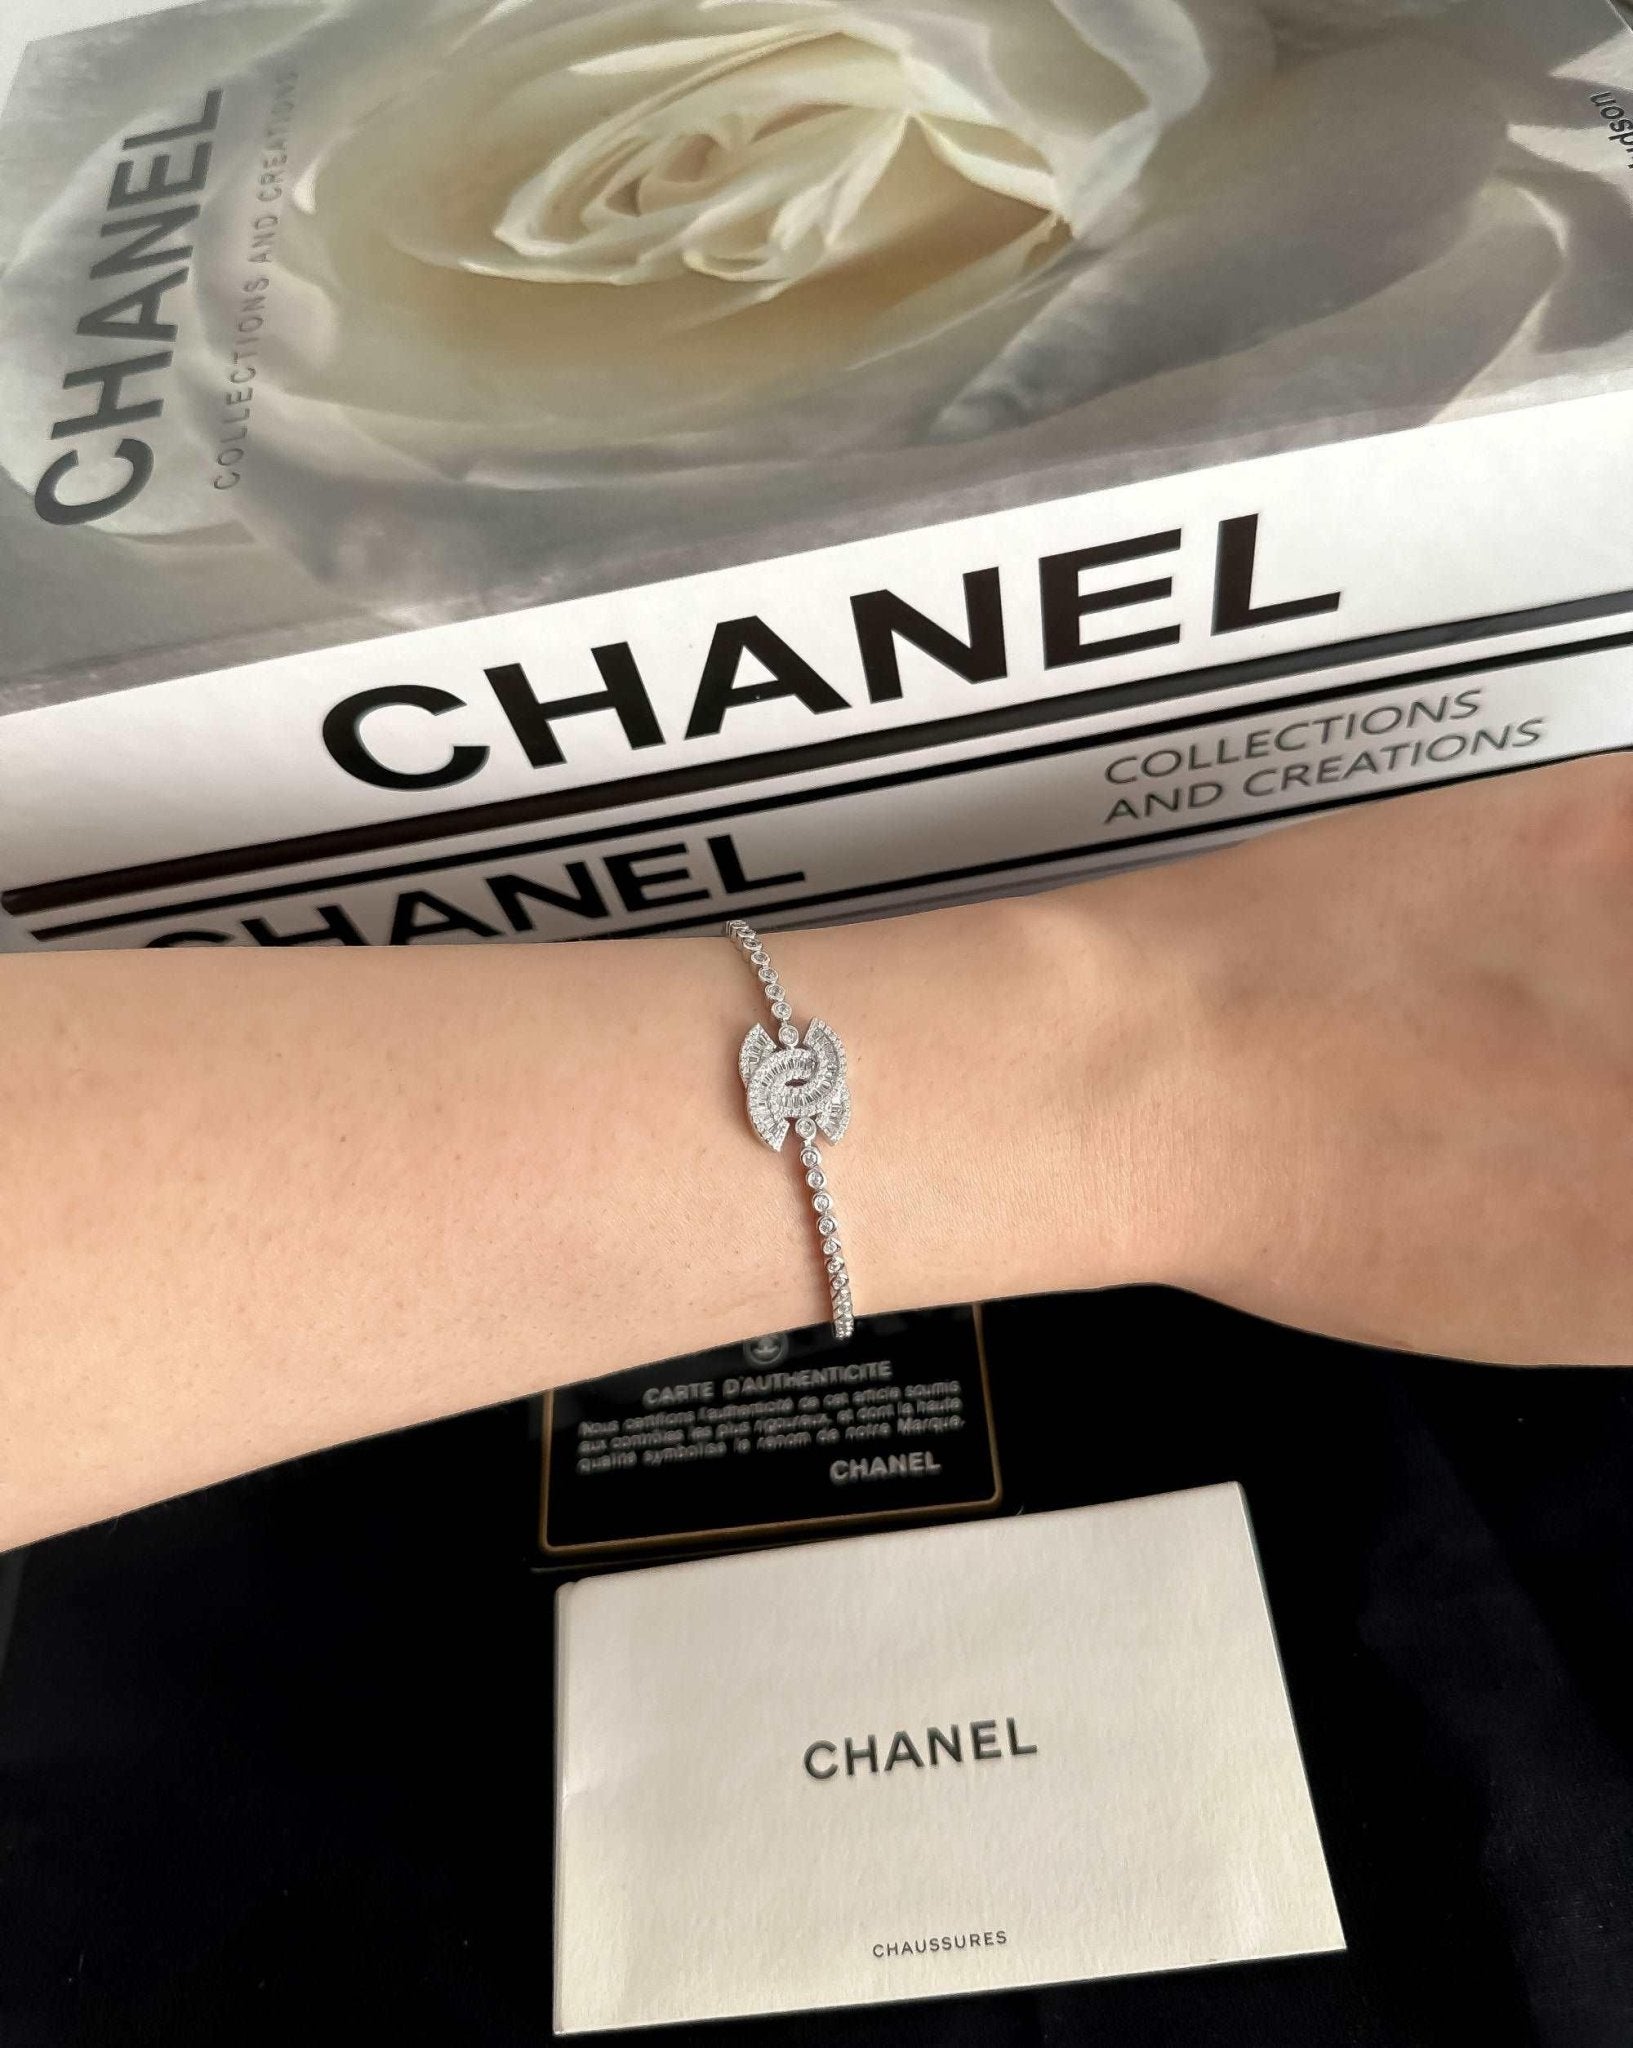 Exquisite 925 Sterling Silver Chanel Bracelet with Brilliant White Zircon Stone - Timeless Elegance - Tracesilver